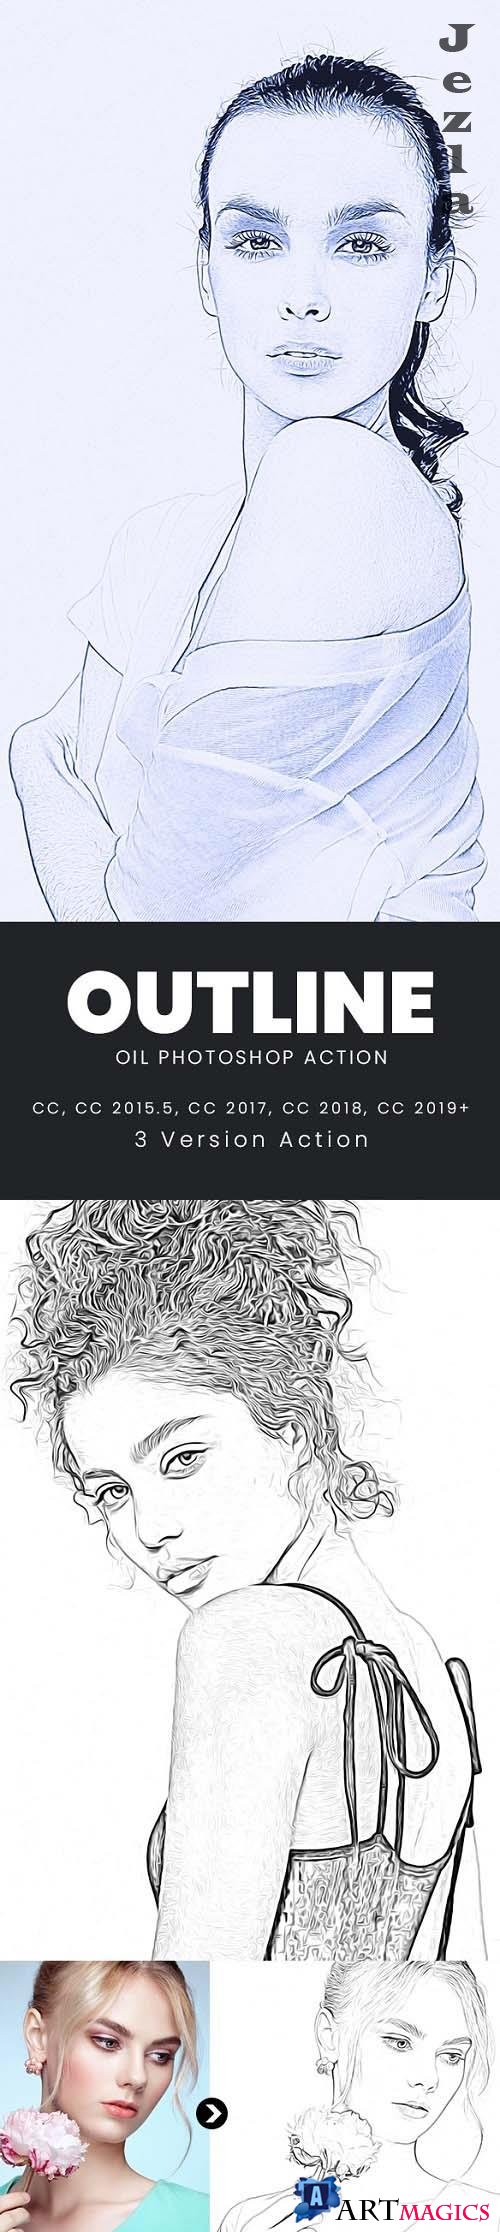 Outline Oil Photoshop Action - 33052588